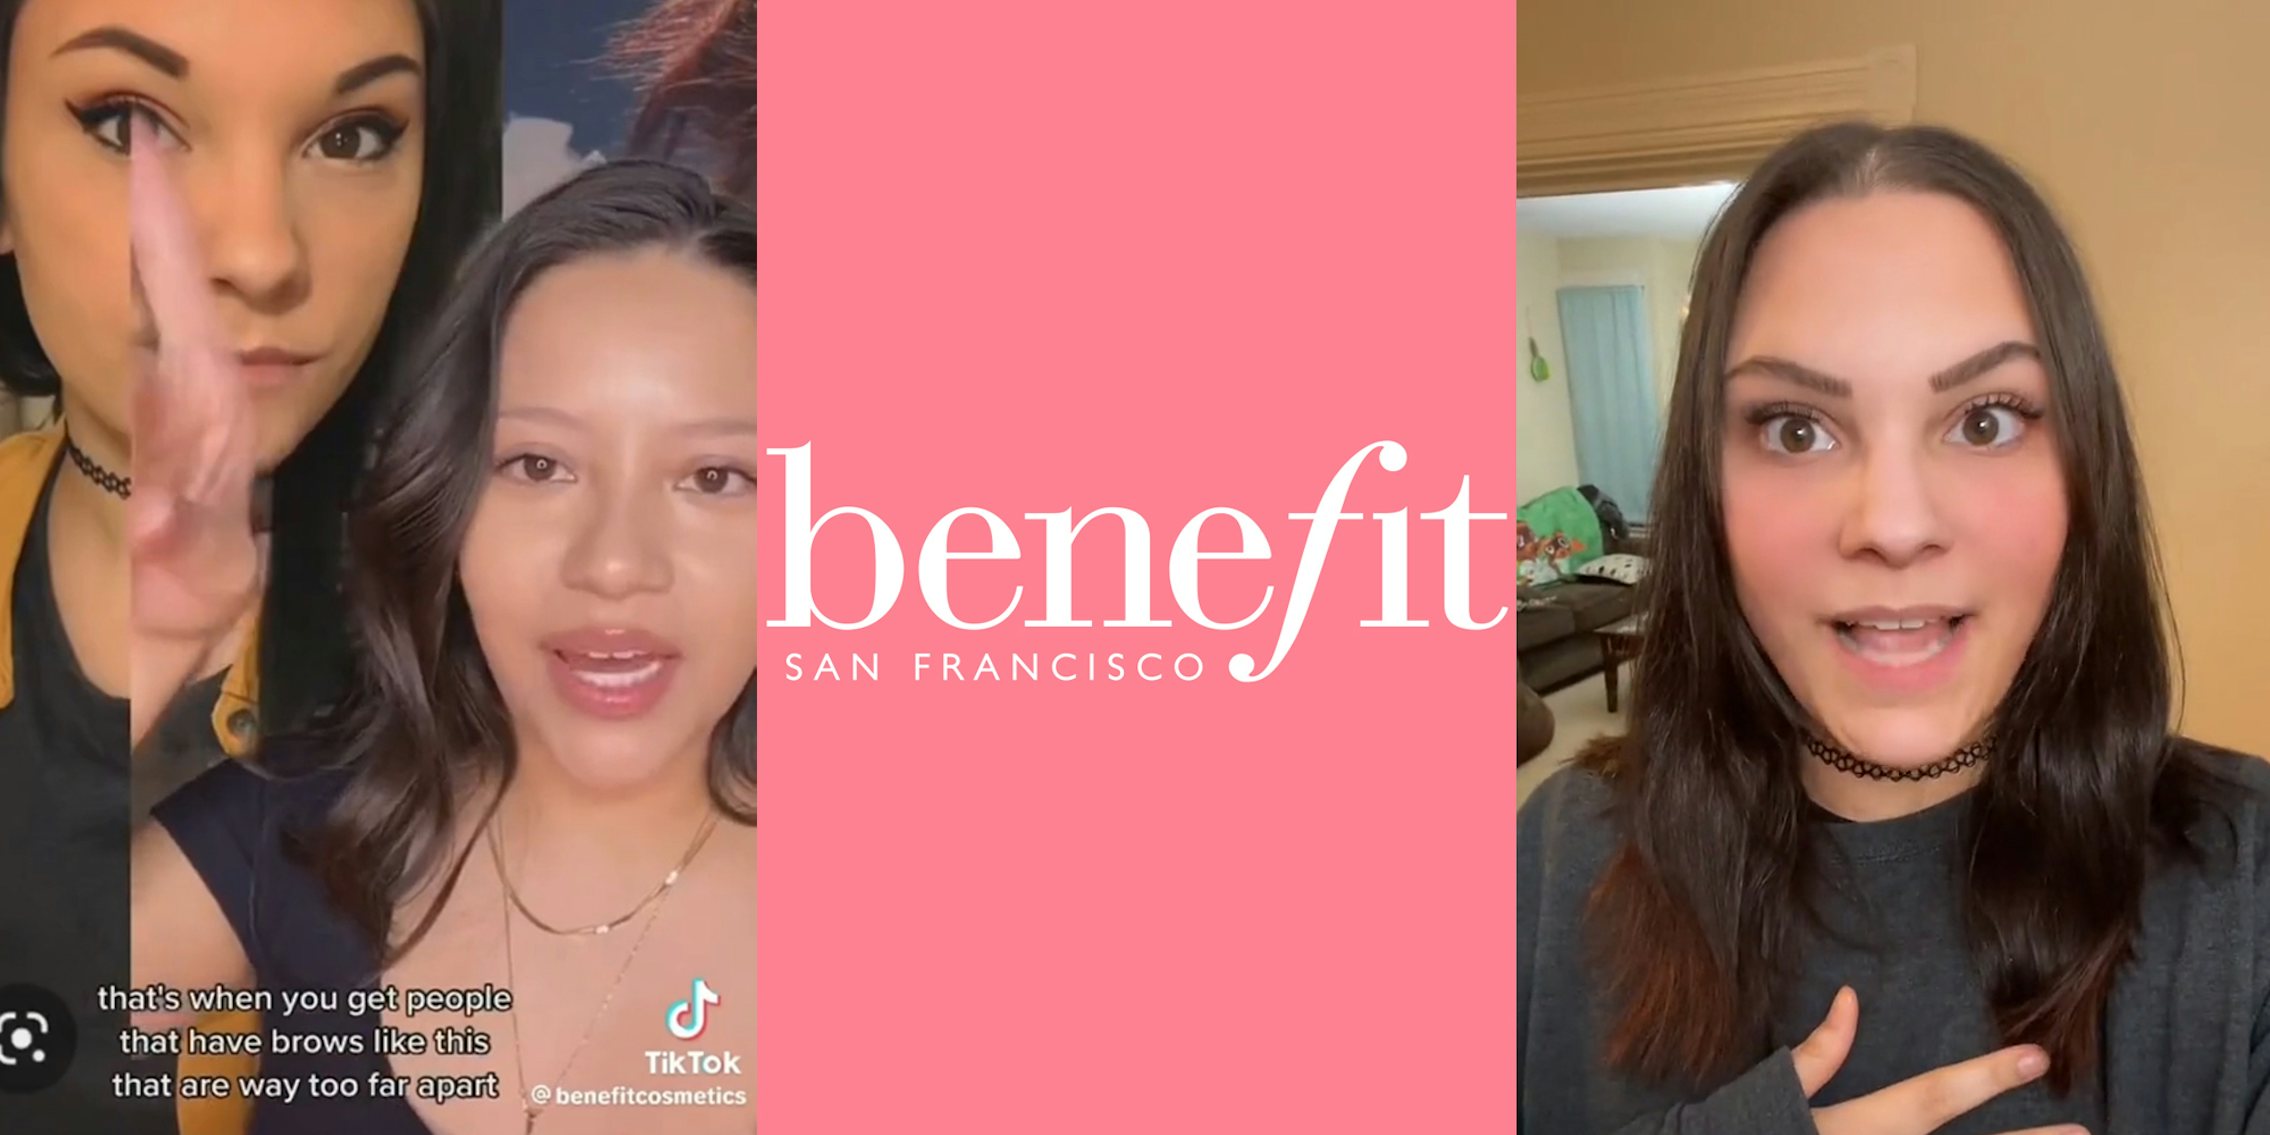 TikToker greenscreen ad over Instagram photo of woman with caption 'that's when you get people that have brows like this way too far apart' (l) Benefit San Francisco logo in front of pink background (c) woman speaking (r)